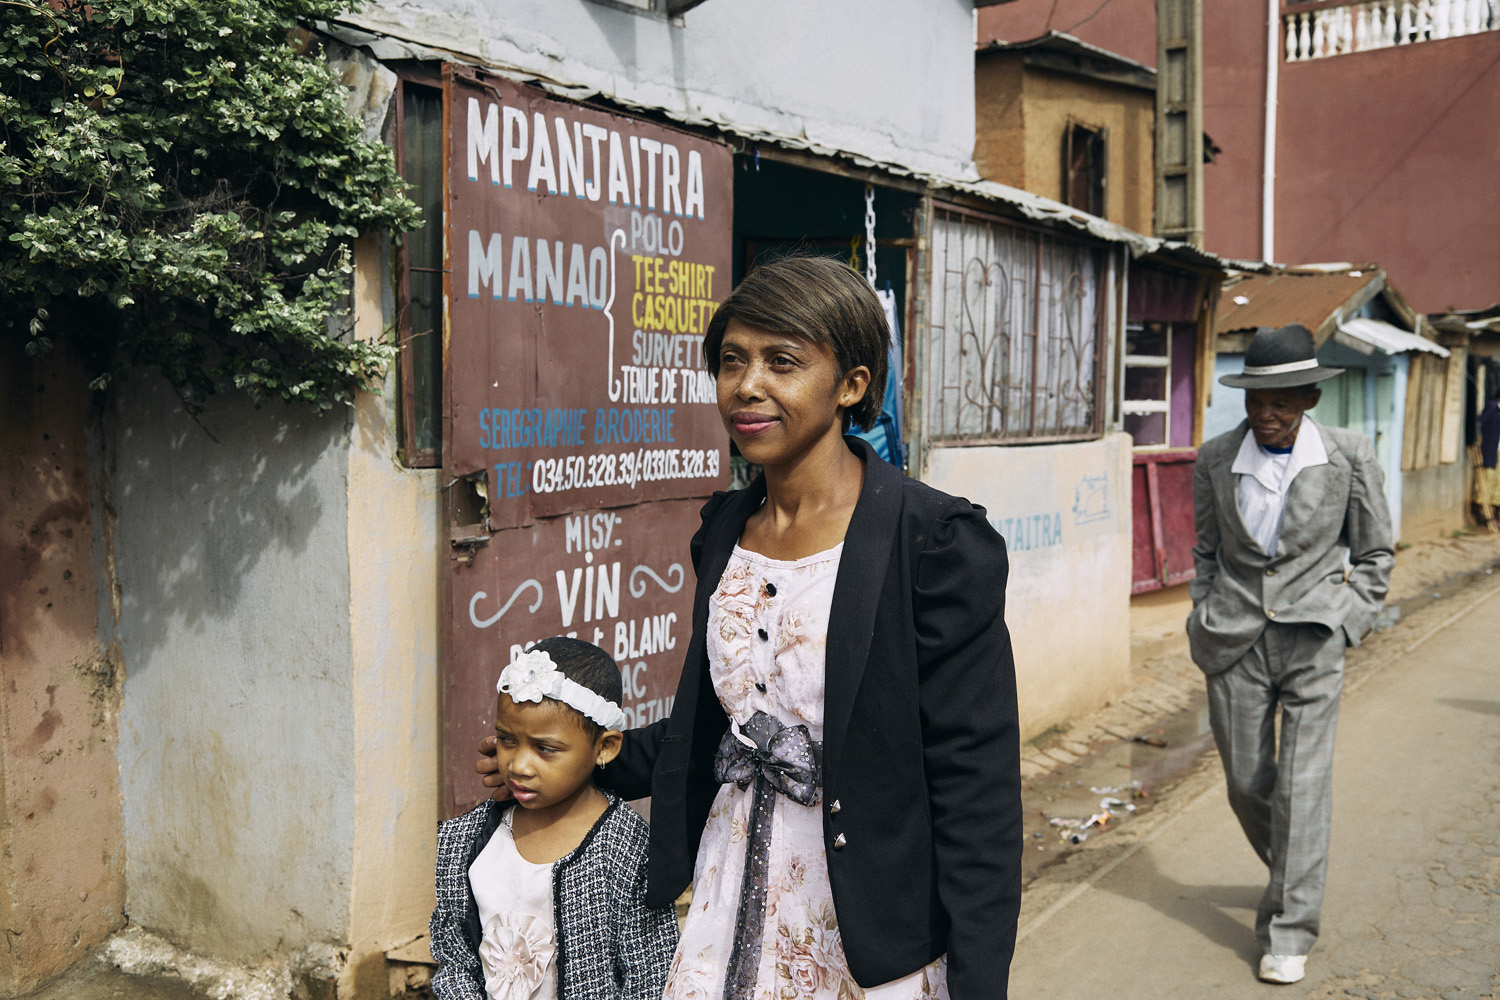 Outside a building with signs and vegetation, a woman in a floral dress and a child in a matching outfit walk by. The woman looks ahead confidently while the child seems pensive. In the background, the elderly man from the first photo walks away, creating a narrative connection between the images.